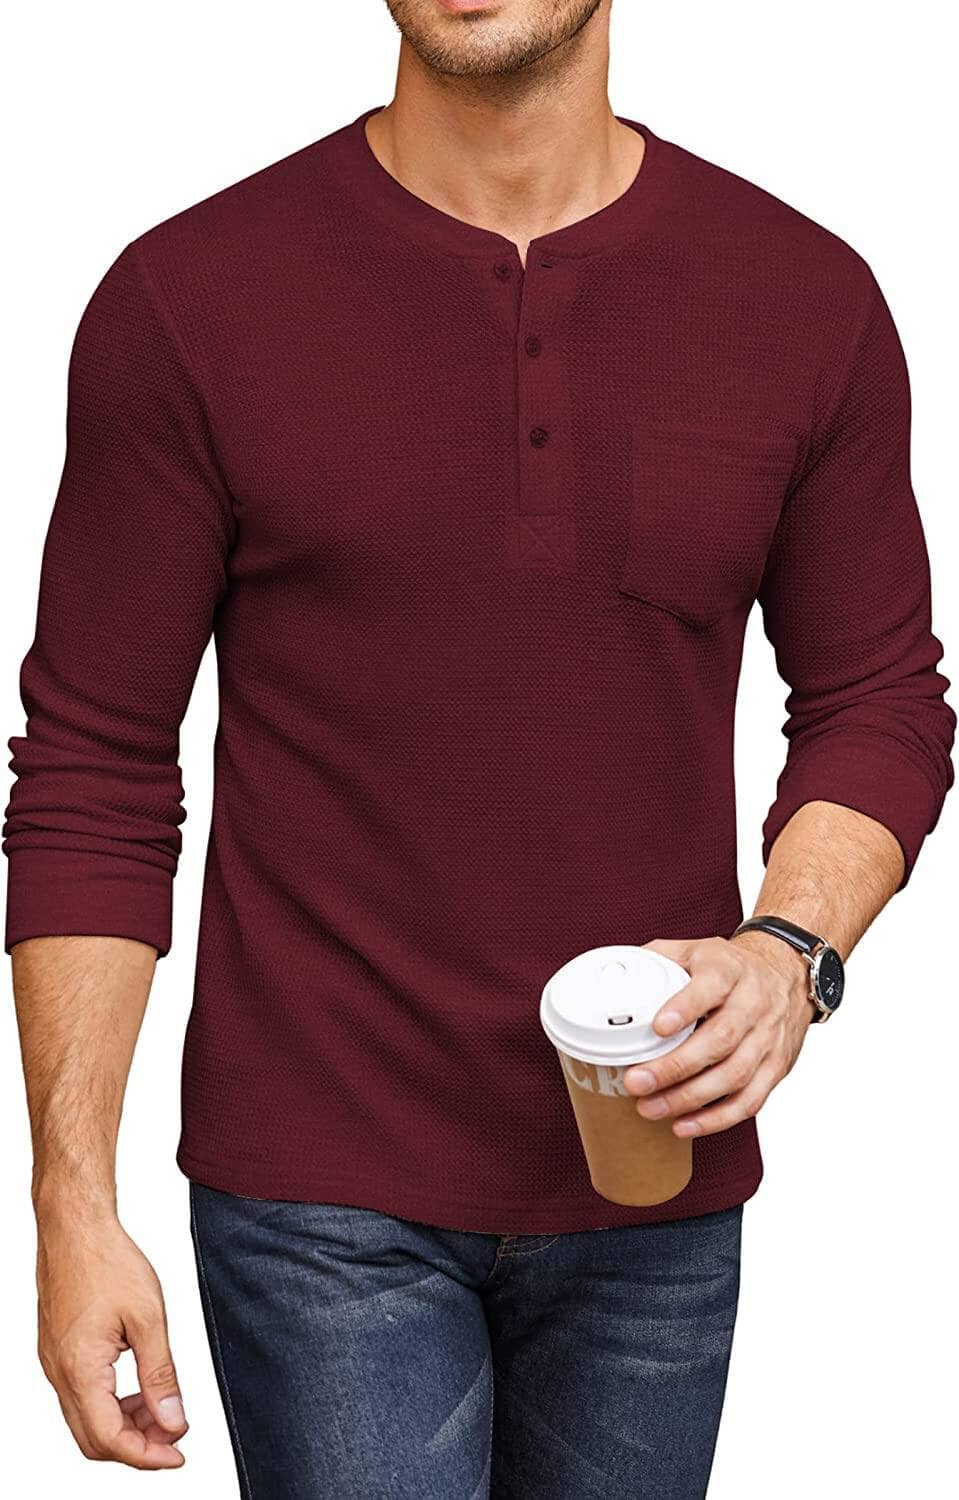 Basic Waffle Pullover Long Sleeve T-Shirt (US Only) T-Shirt Coofandy's Wine Red S 